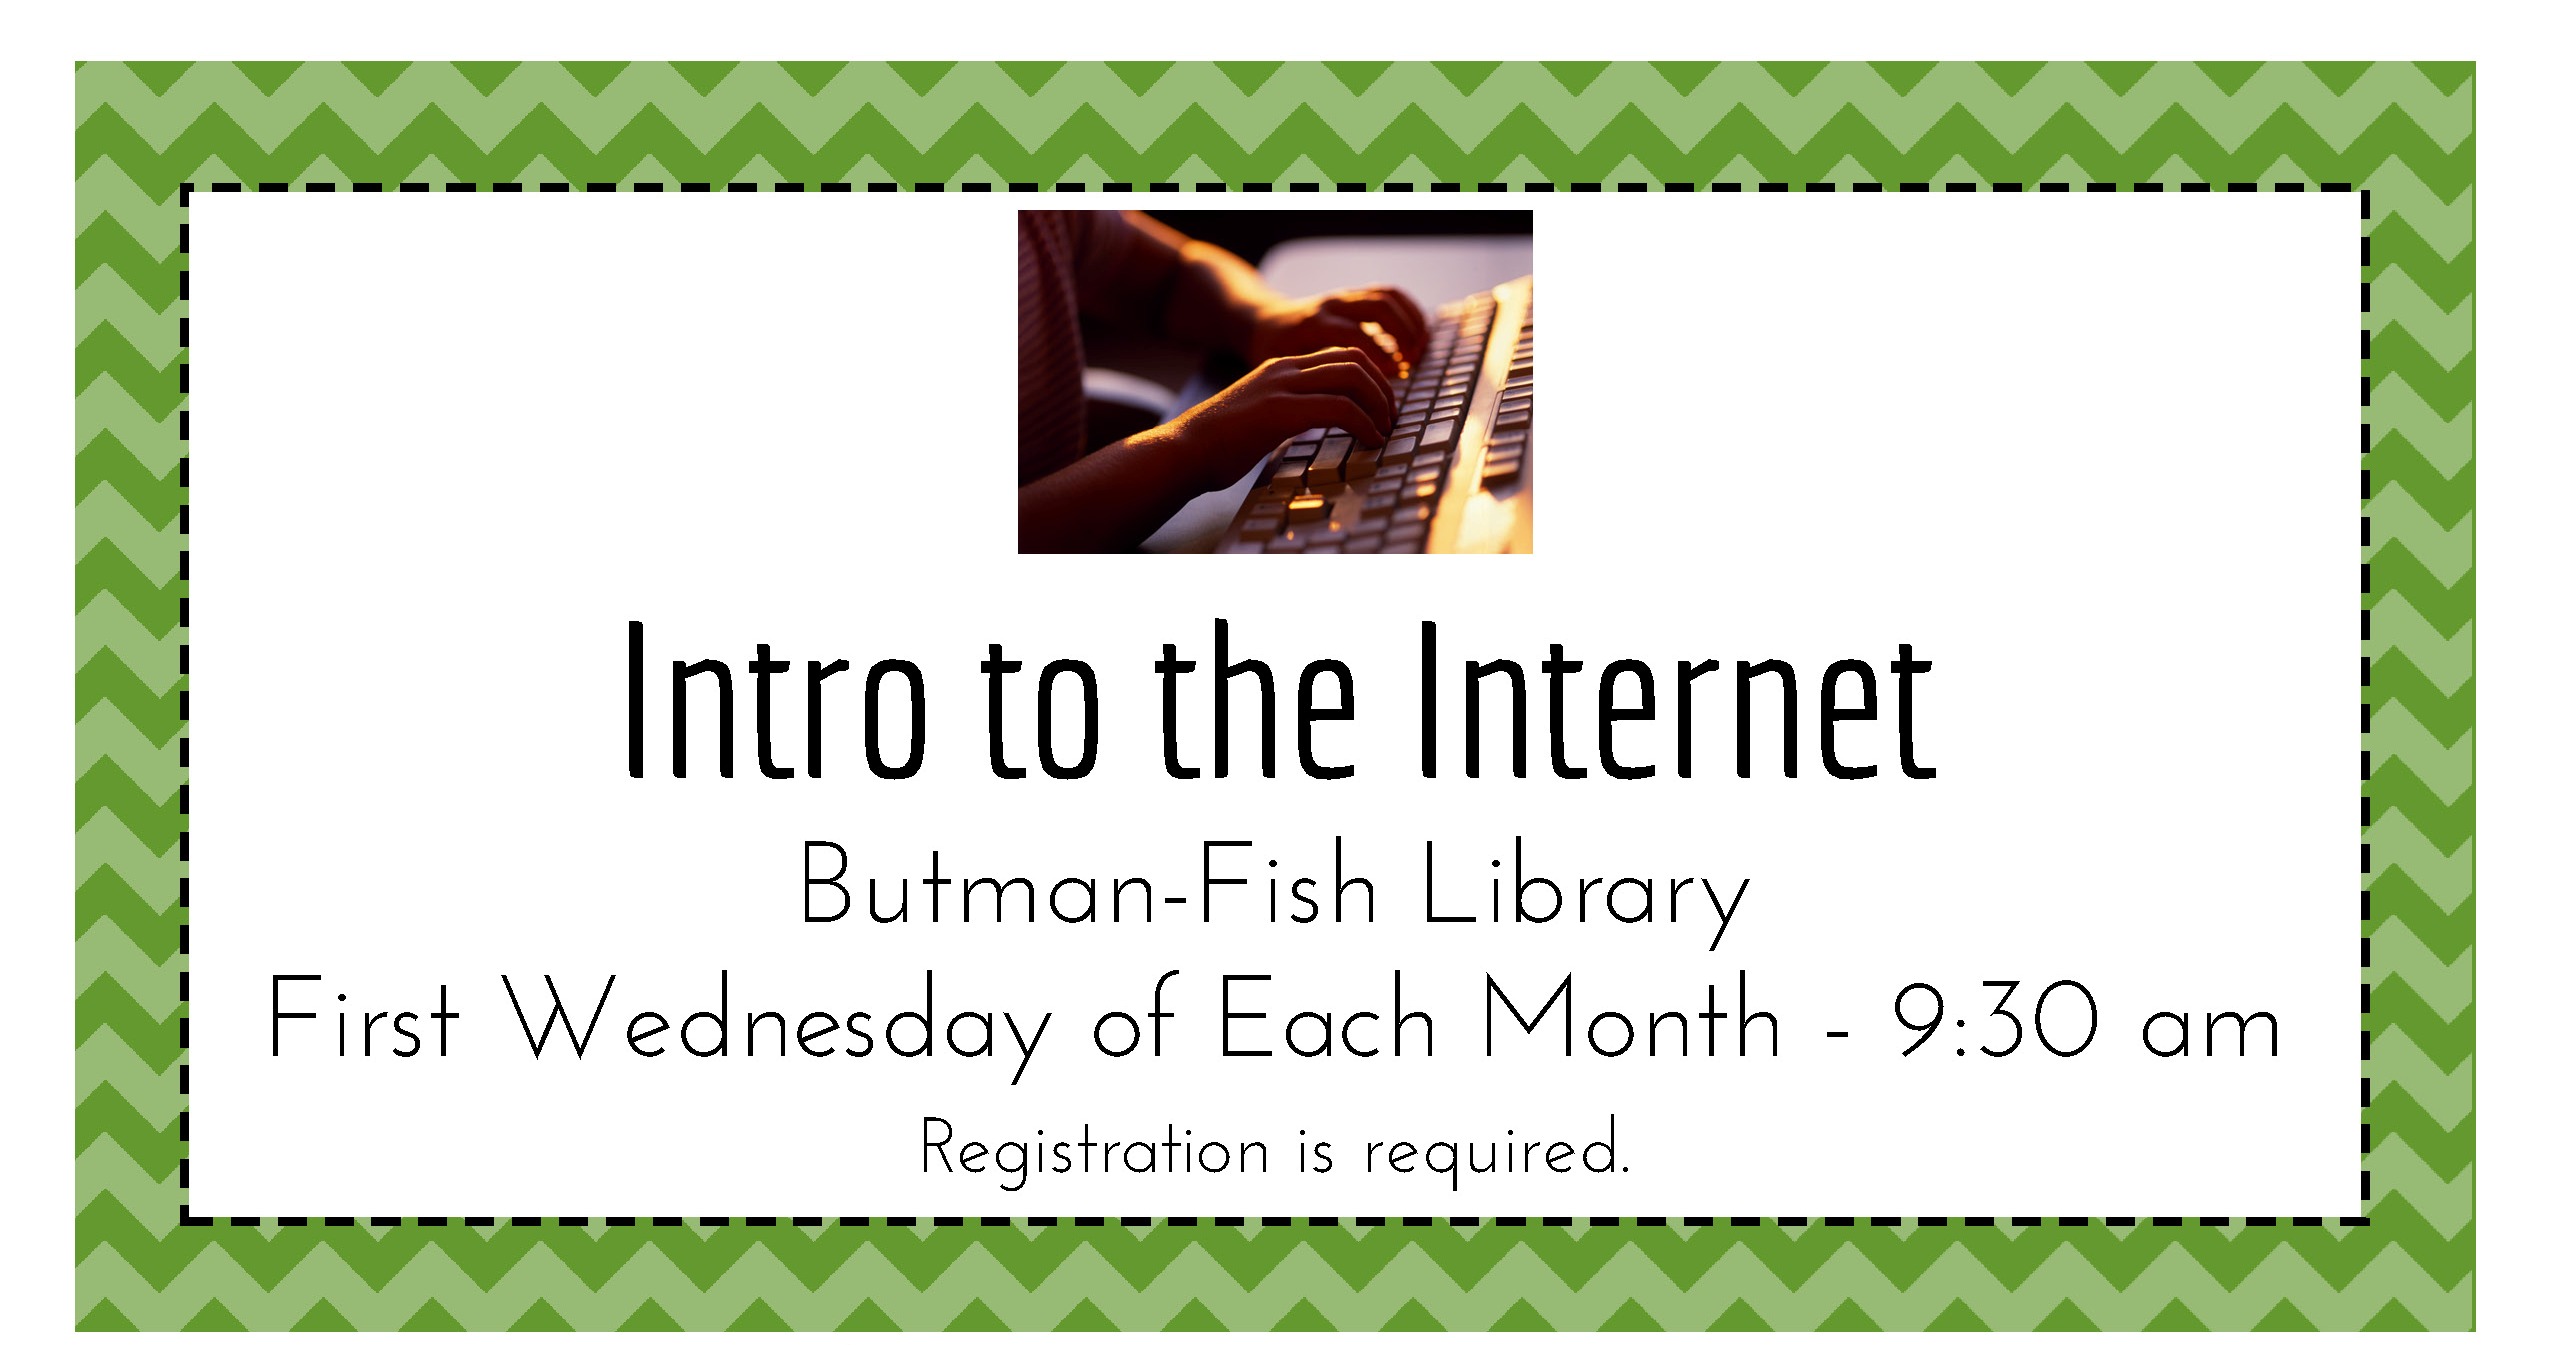 Introduction to the Internet 9:30 First Wednesday of each month.